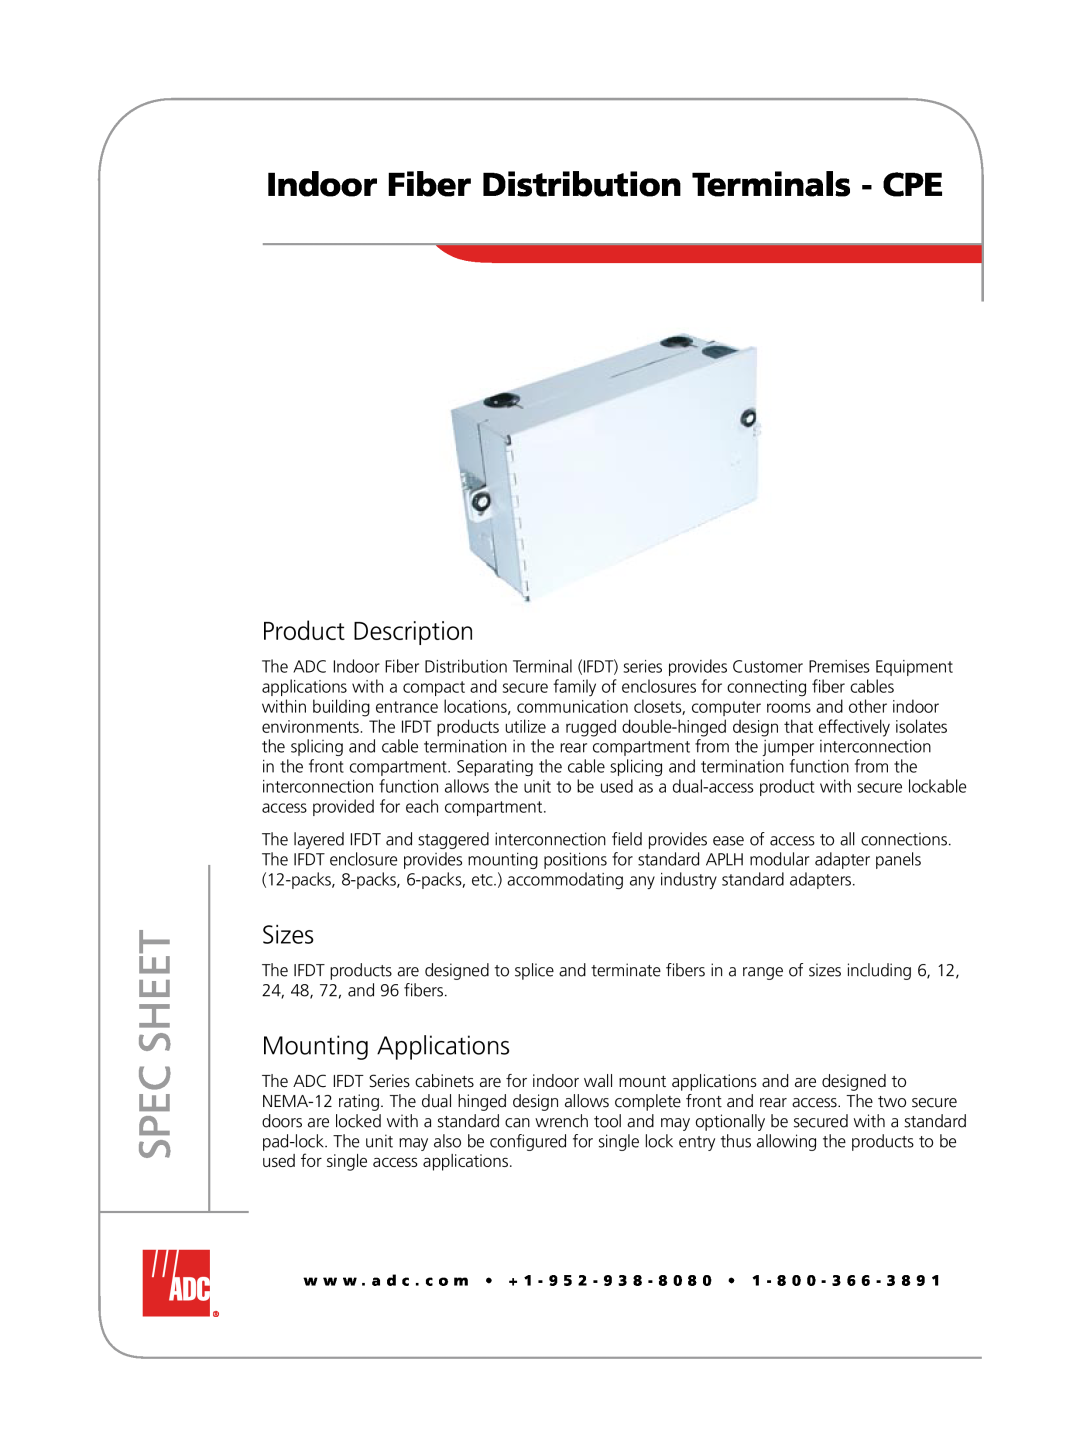 ADC manual Indoor Fiber Distribution Terminals - CPE, Product Description, Sizes, Mounting Applications, Spec Sheet 